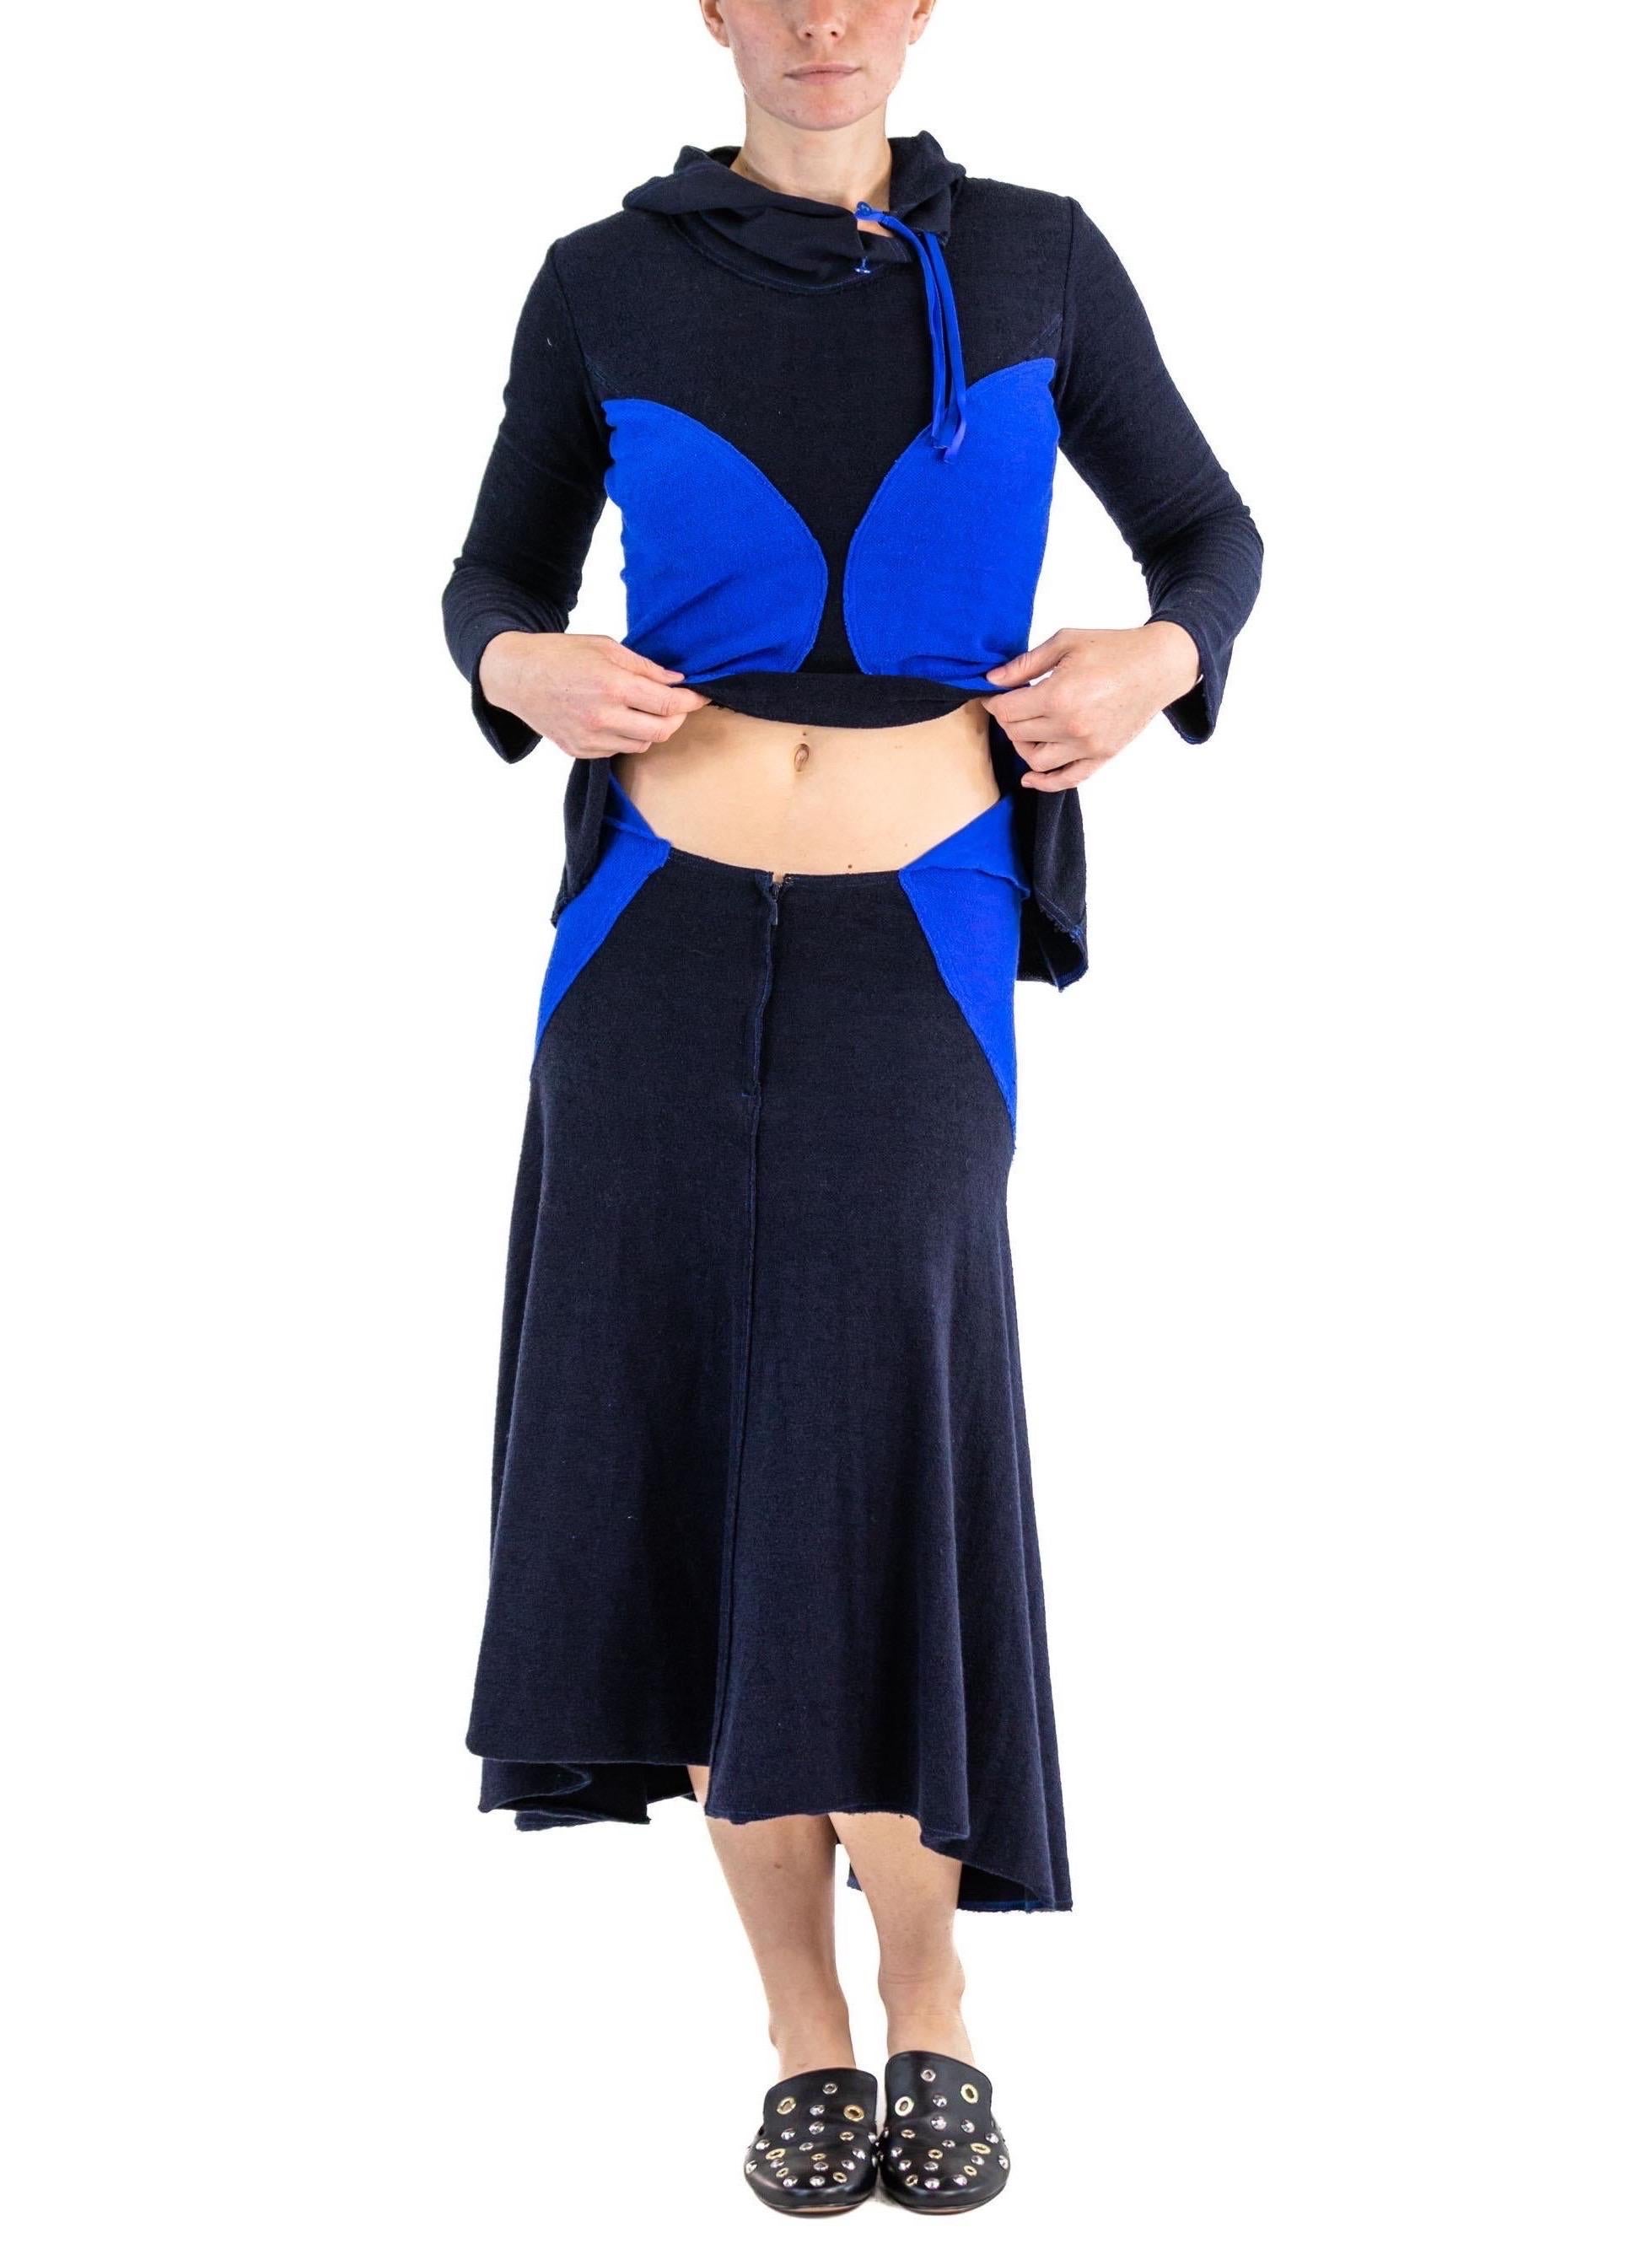 1990S ISSEY MIYAKE Cobalt Blue & Navy Cotton Terry  Colorblock Top Skirt Ensemb For Sale 3